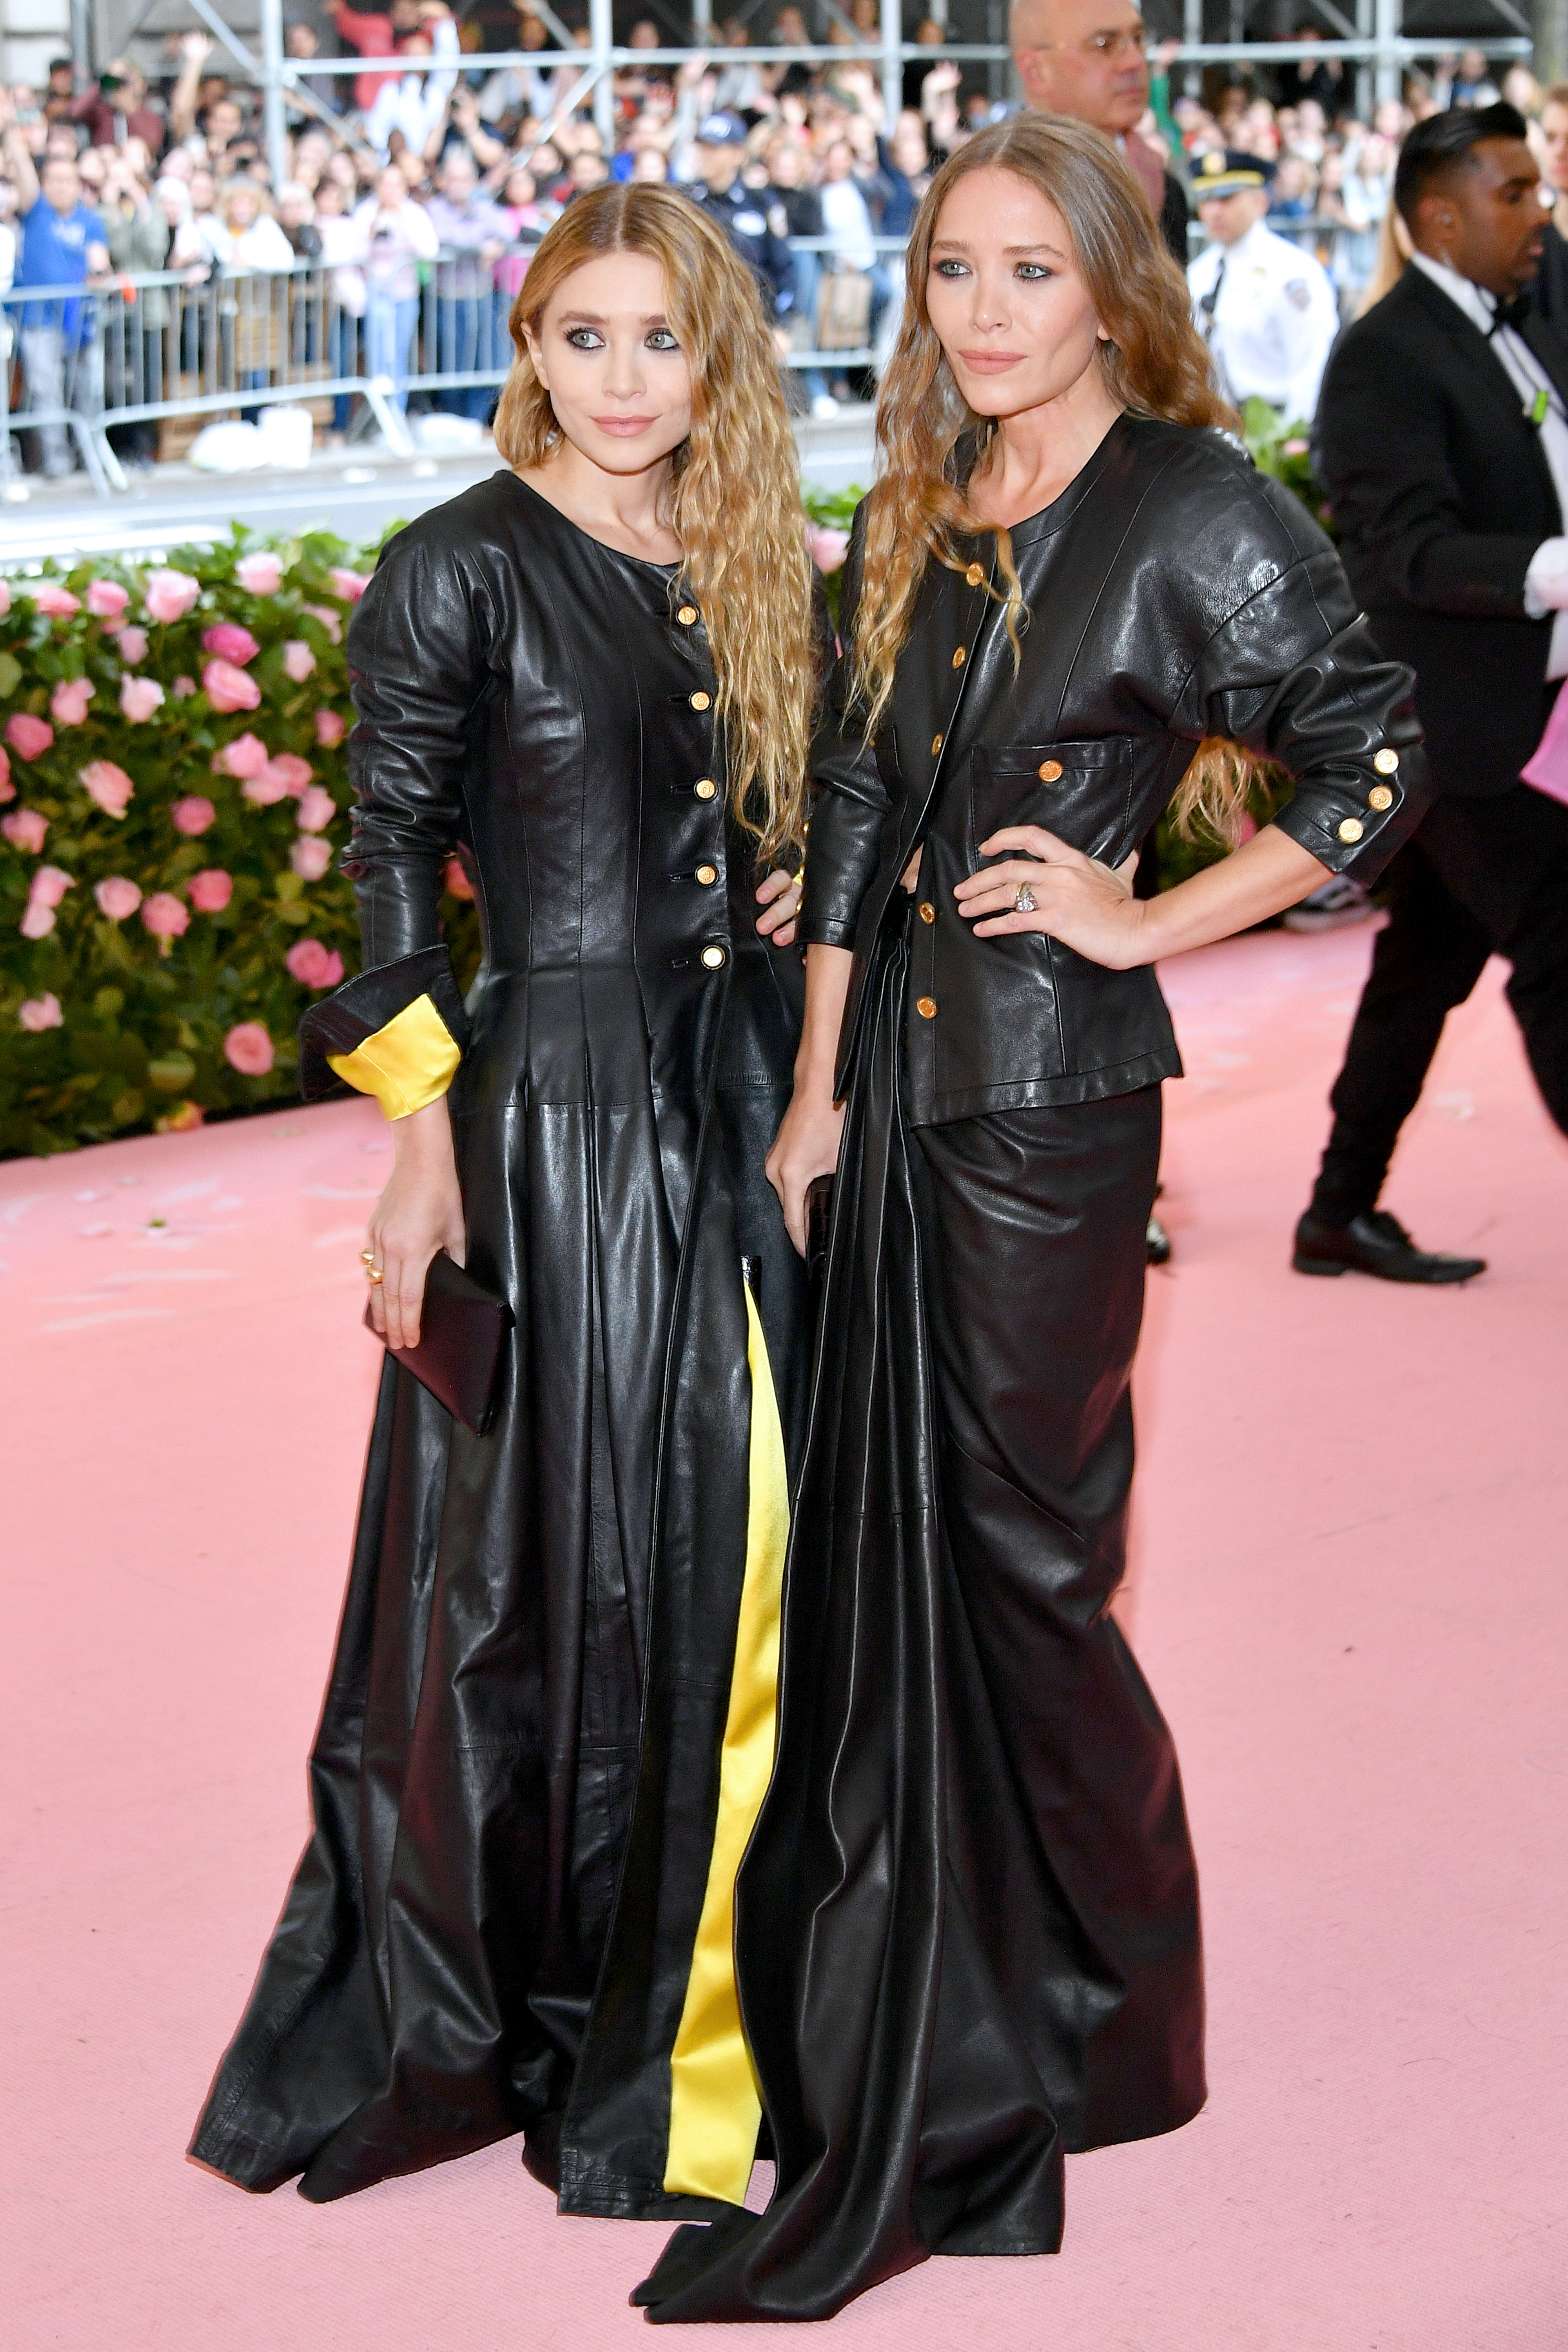 Ashley Olsen and Mary Kate Olsen at The 2019 Met Gala Celebrating Camp: Notes on Fashion at Metropolitan Museum of Art on May 06 in New York City